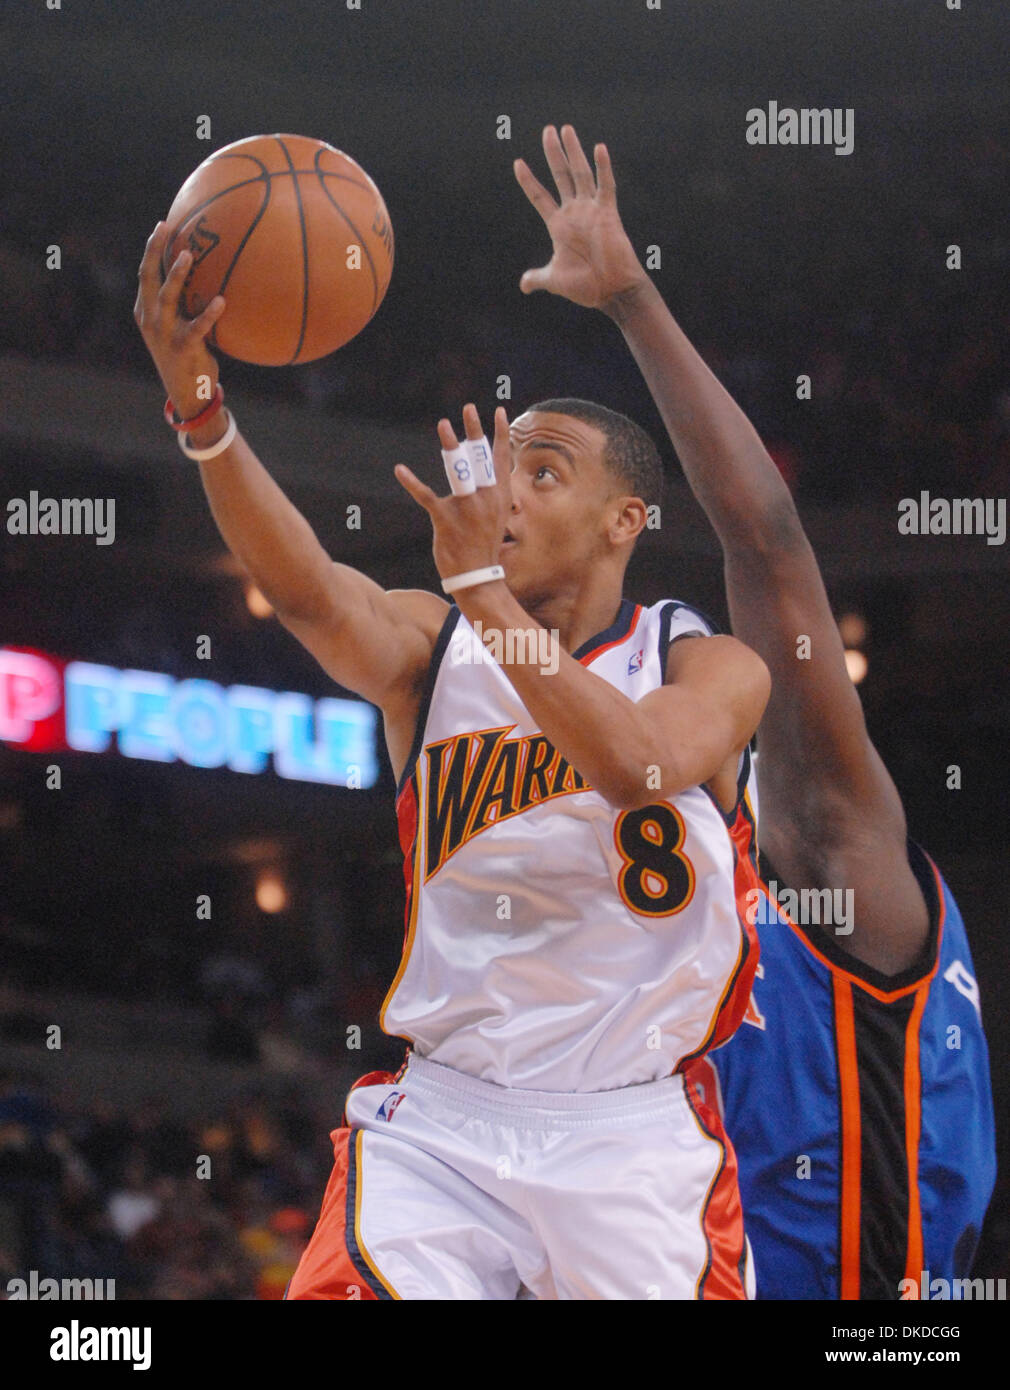 Golden State Warriors Monta Ellis goes up for the shot over New York Knicks  Zach Randolph in the 1st quarter of their  game at Oracle Arena in Oakland Calif., Sunday, January 27, 2008. (Bob Larson/Contra Costa Times/ZUMA Press) Stock Photo